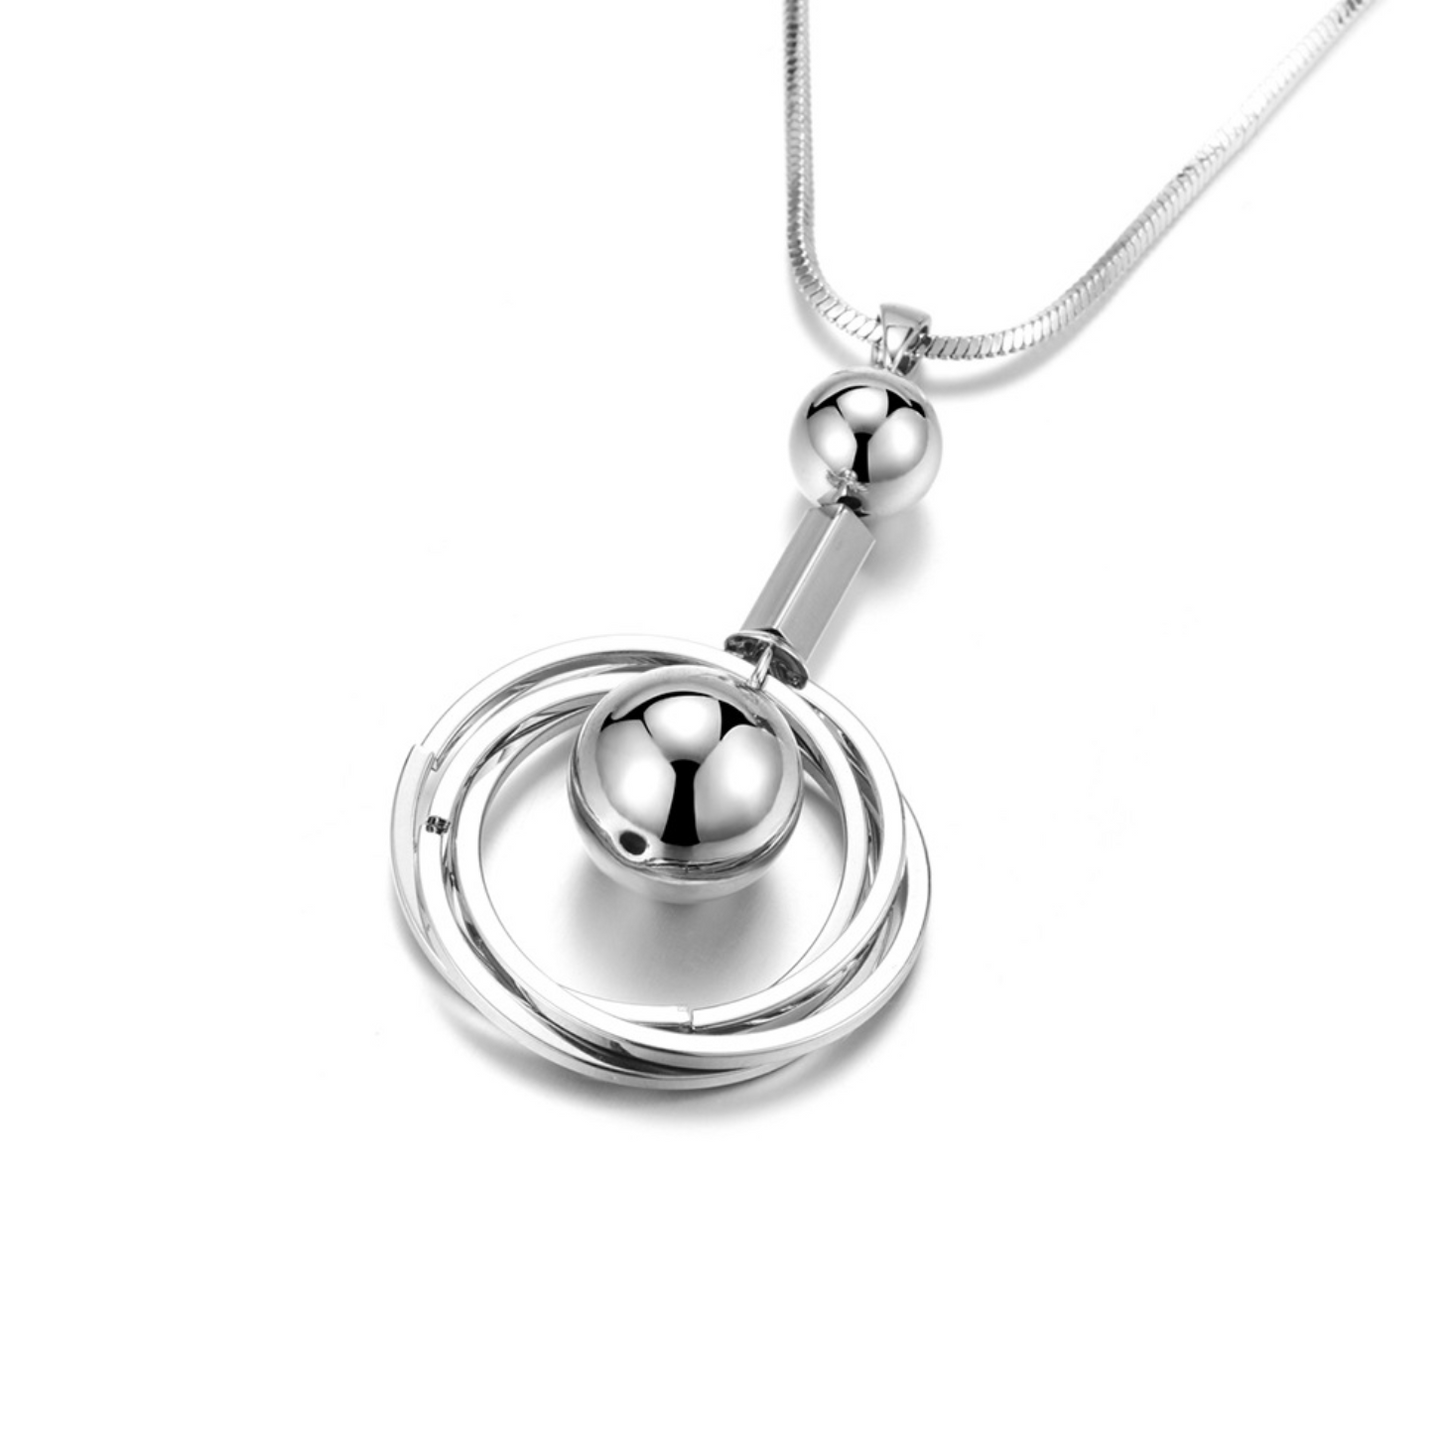 Sphere Long Silver Necklace